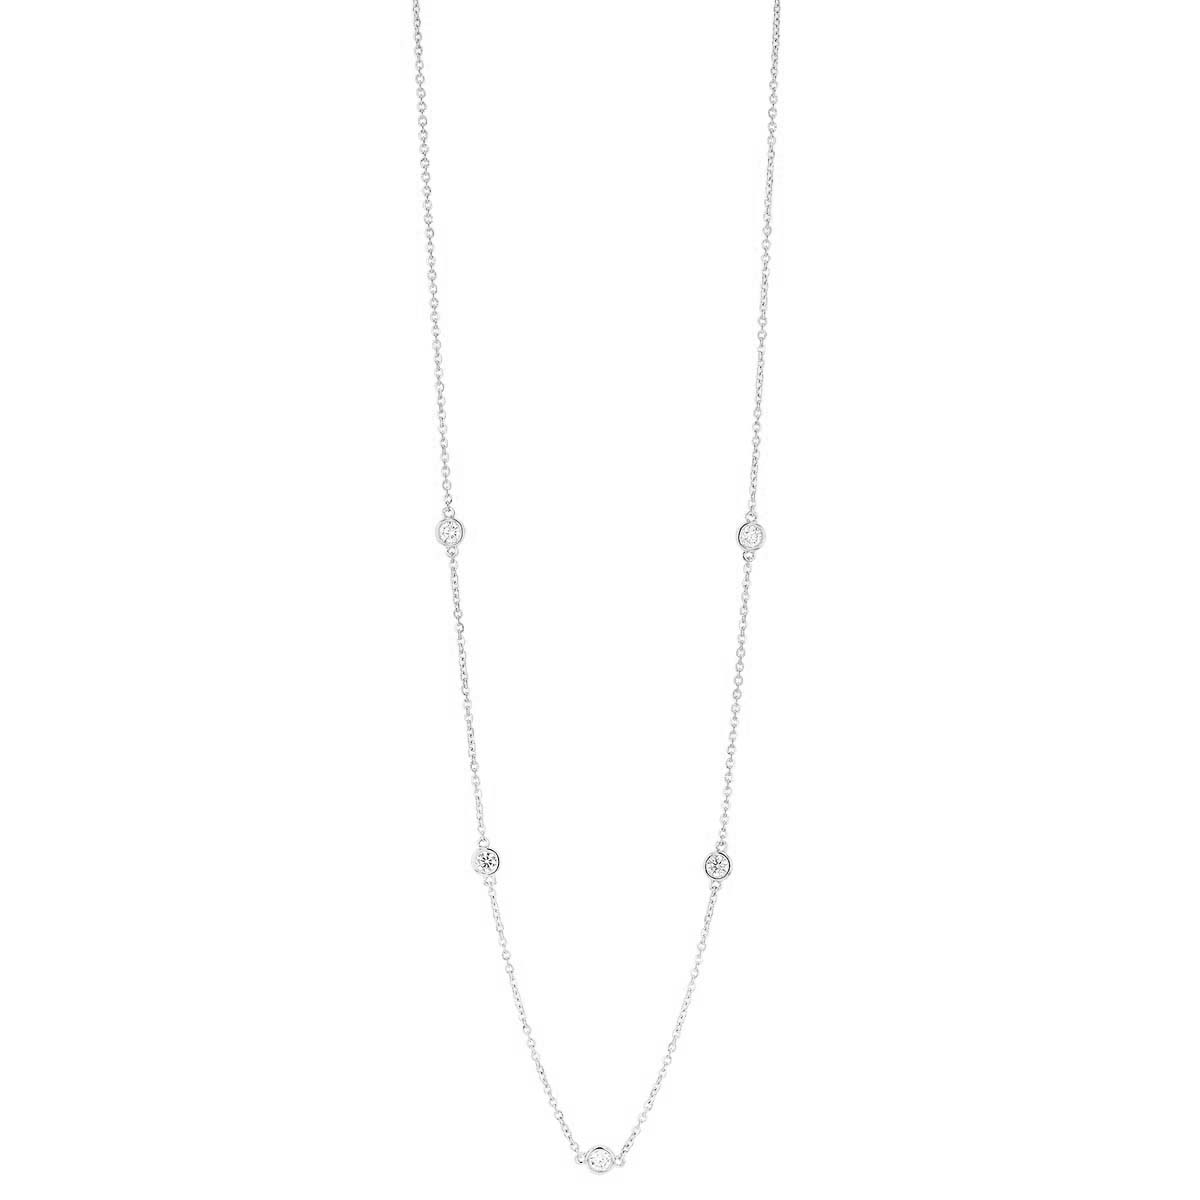 Borsheims Signature Collection Diamond 5 Station Necklace in White Gold ...